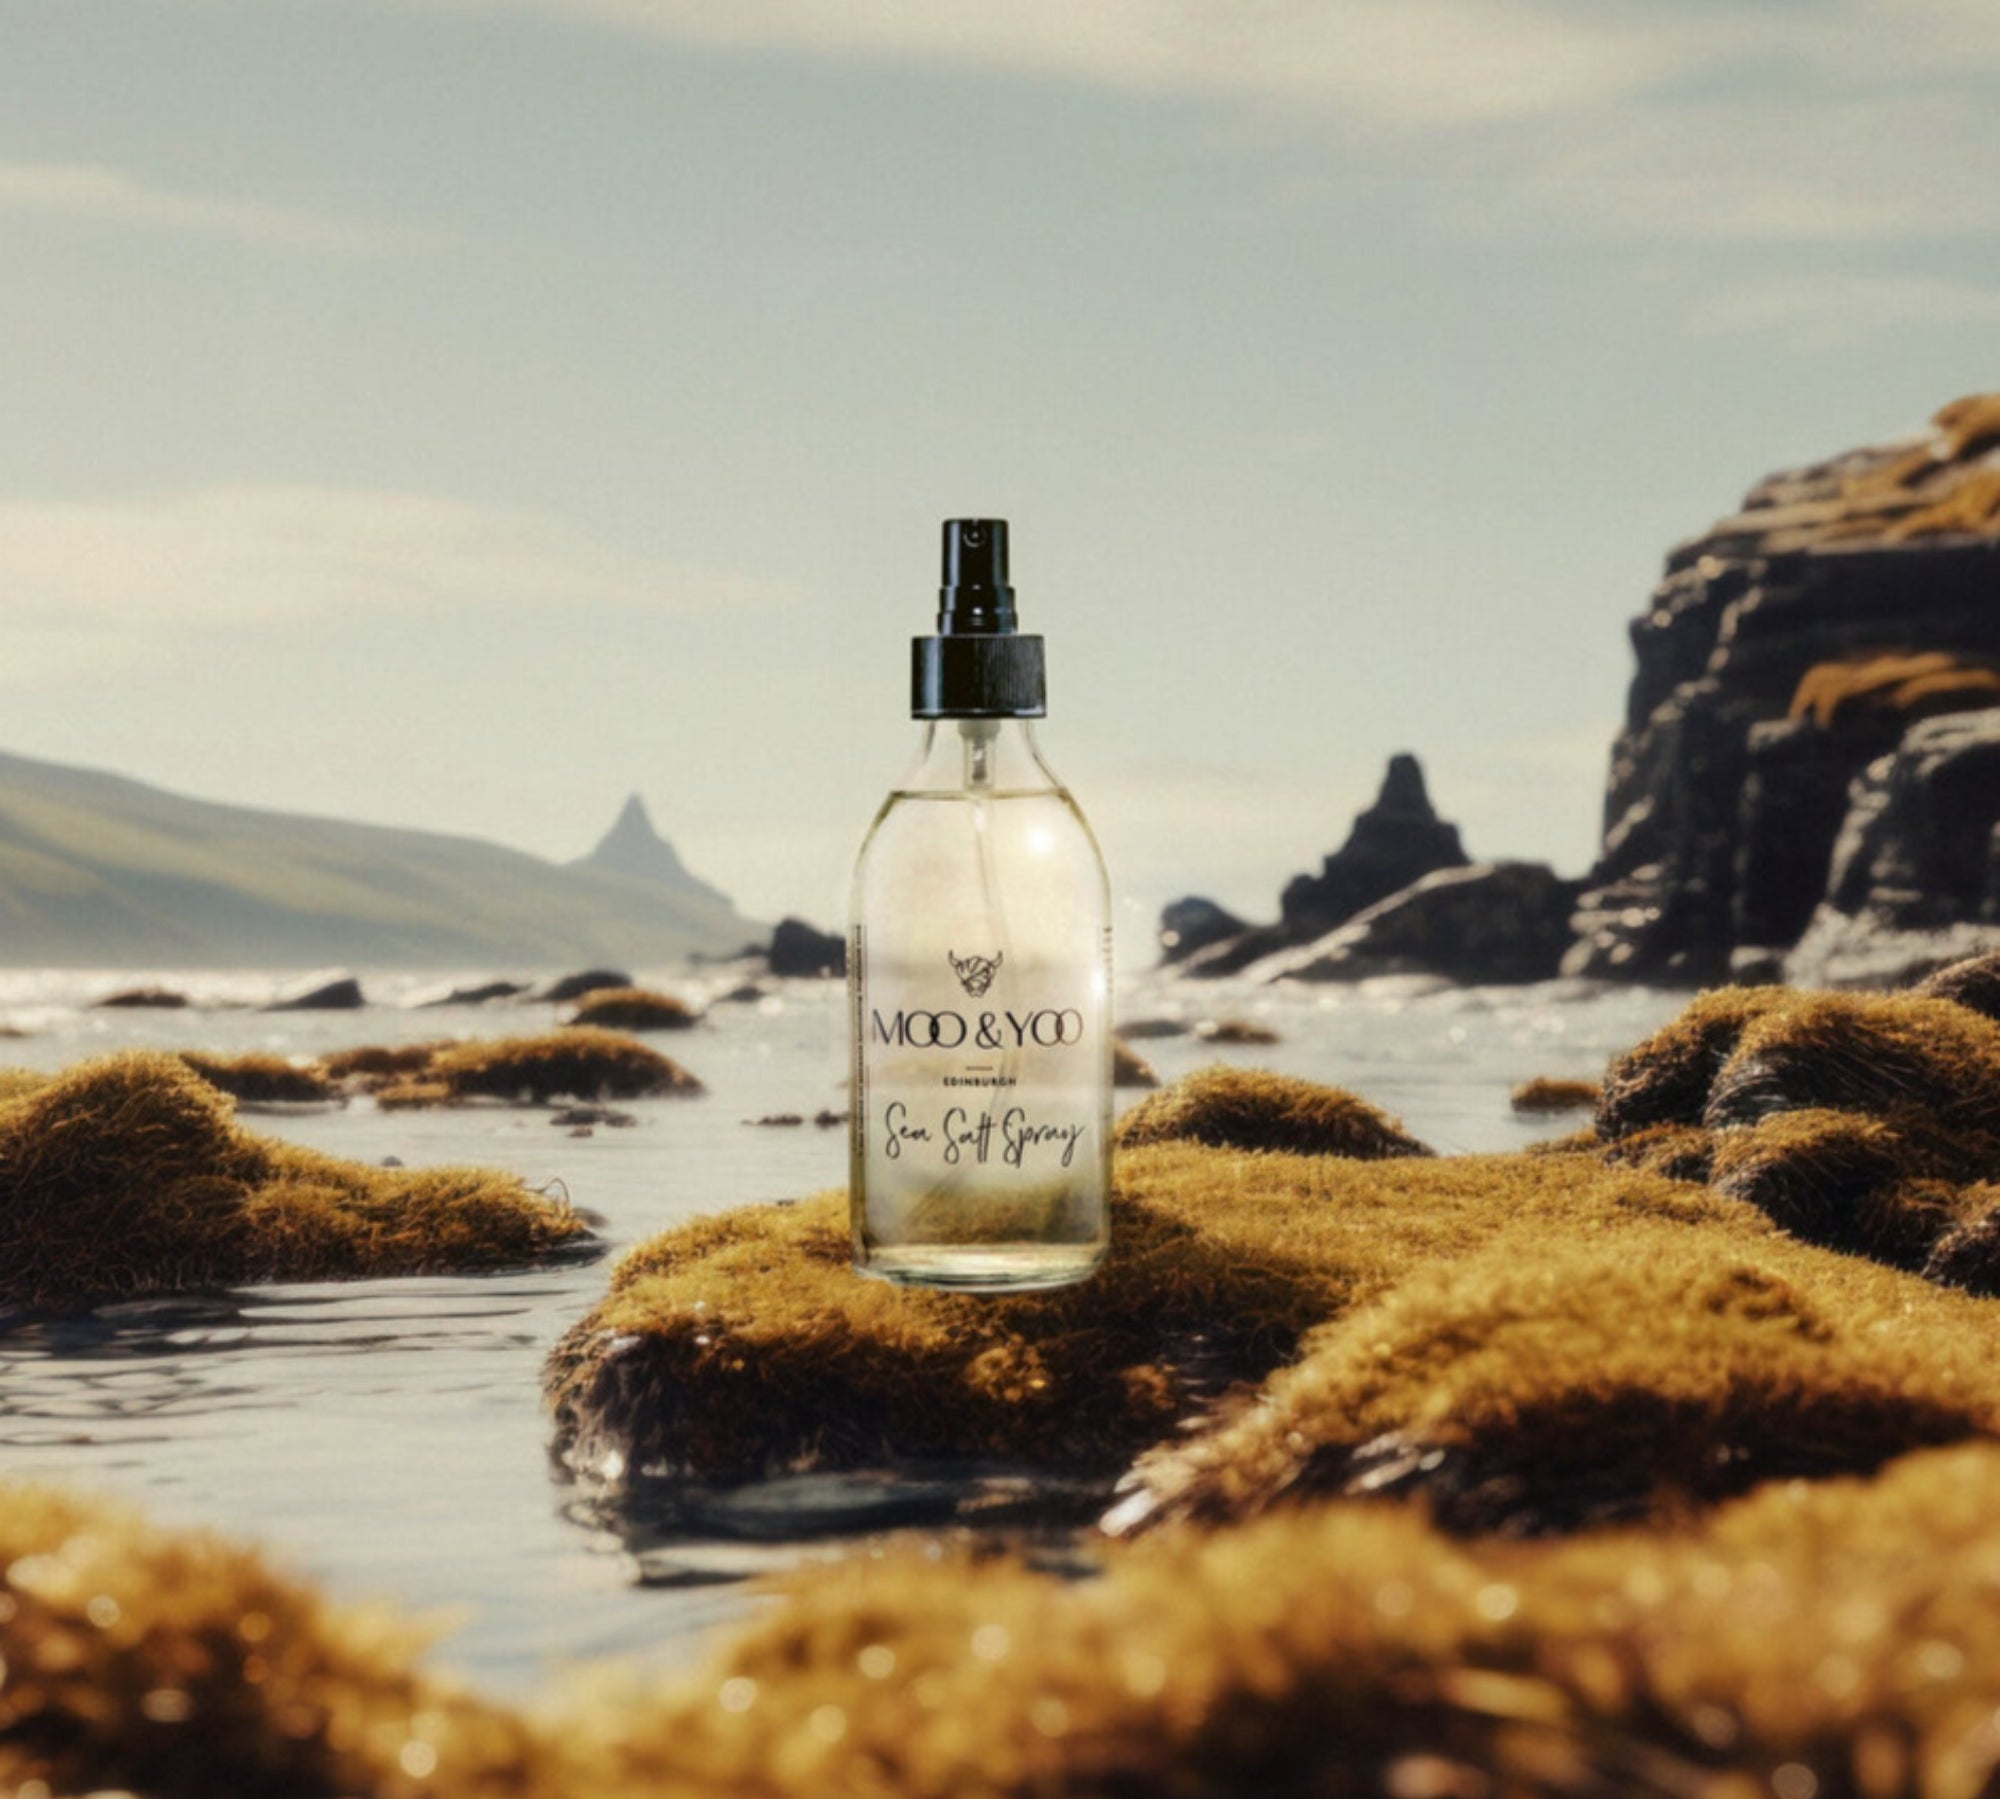 A glass bottle of Moo and Yoo Sea Salt Spray sitting on a mossy rock at the edge of a Scottish Loch